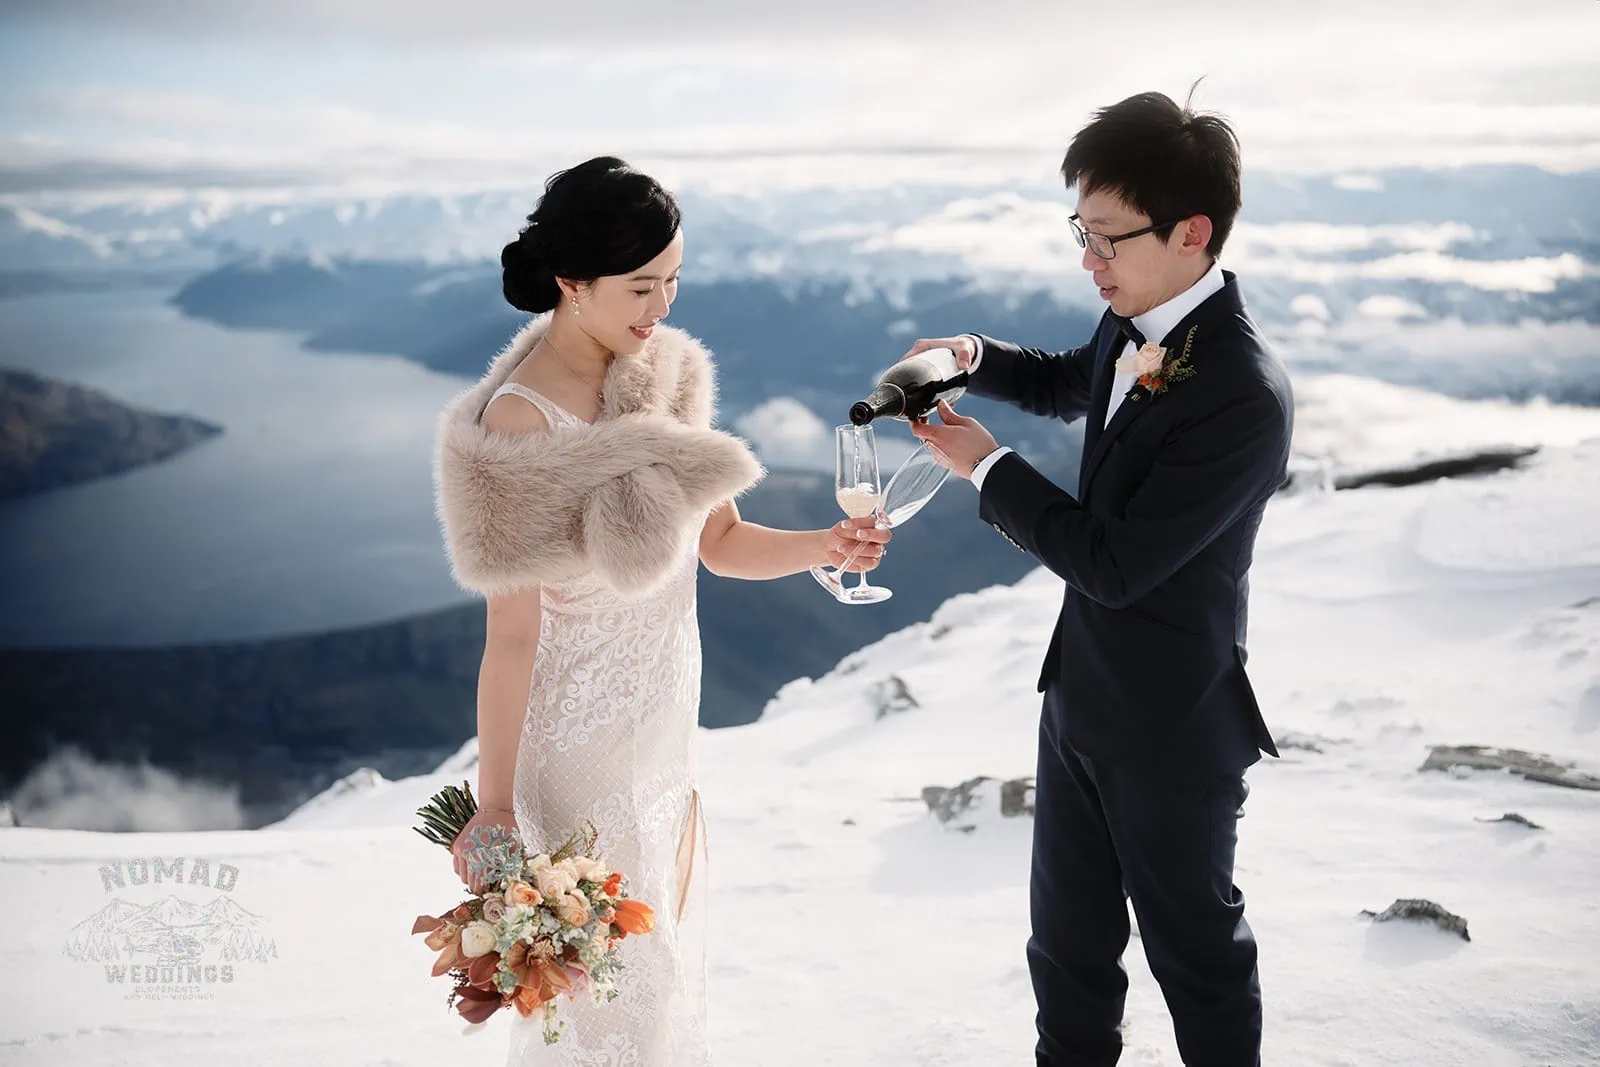 Joanna and Tony, a bride and groom from New Zealand, pouring wine during their pre-wedding shoot atop Queenstown's snowy mountain.